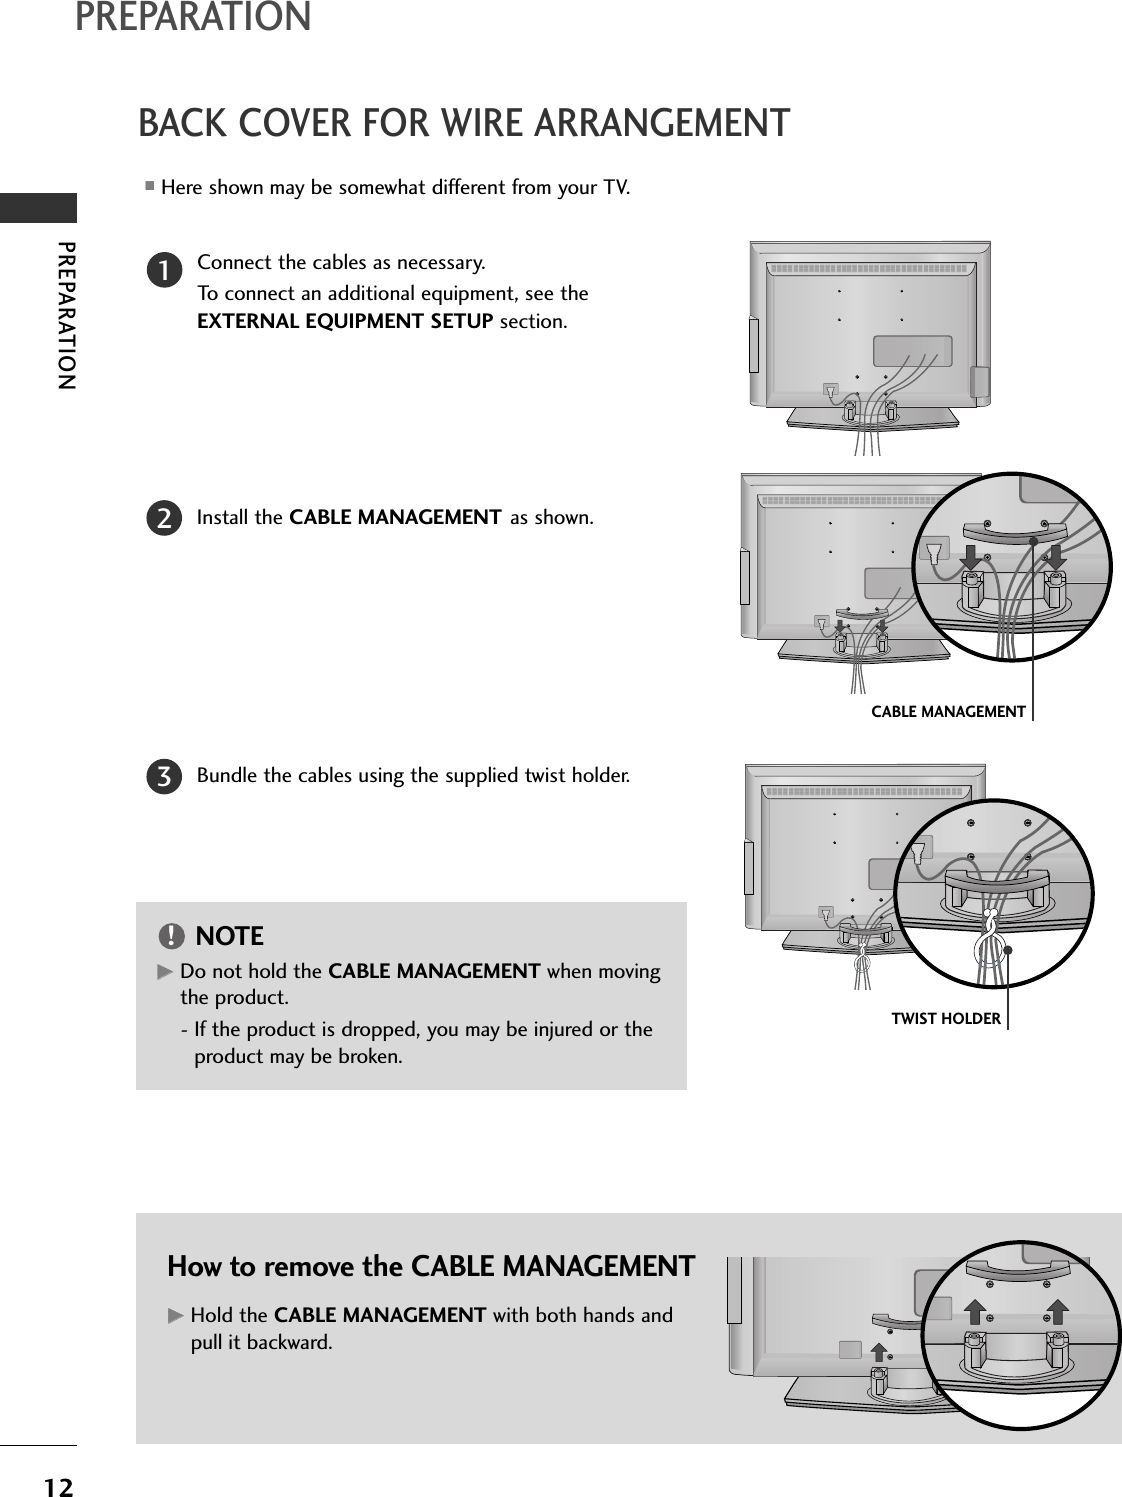 PREPARATION12BACK COVER FOR WIRE ARRANGEMENTPREPARATIONConnect the cables as necessary.To connect an additional equipment, see theEXTERNAL EQUIPMENT SETUP section.Install the CABLE MANAGEMENT as shown.How to remove the CABLE MANAGEMENTGGHold the CABLE MANAGEMENT with both hands andpull it backward.CABLE MANAGEMENTTWIST HOLDERGGDo not hold the CABLE MANAGEMENT when movingthe product.- If the product is dropped, you may be injured or theproduct may be broken.NOTE!12Bundle the cables using the supplied twist holder.3■Here shown may be somewhat different from your TV.